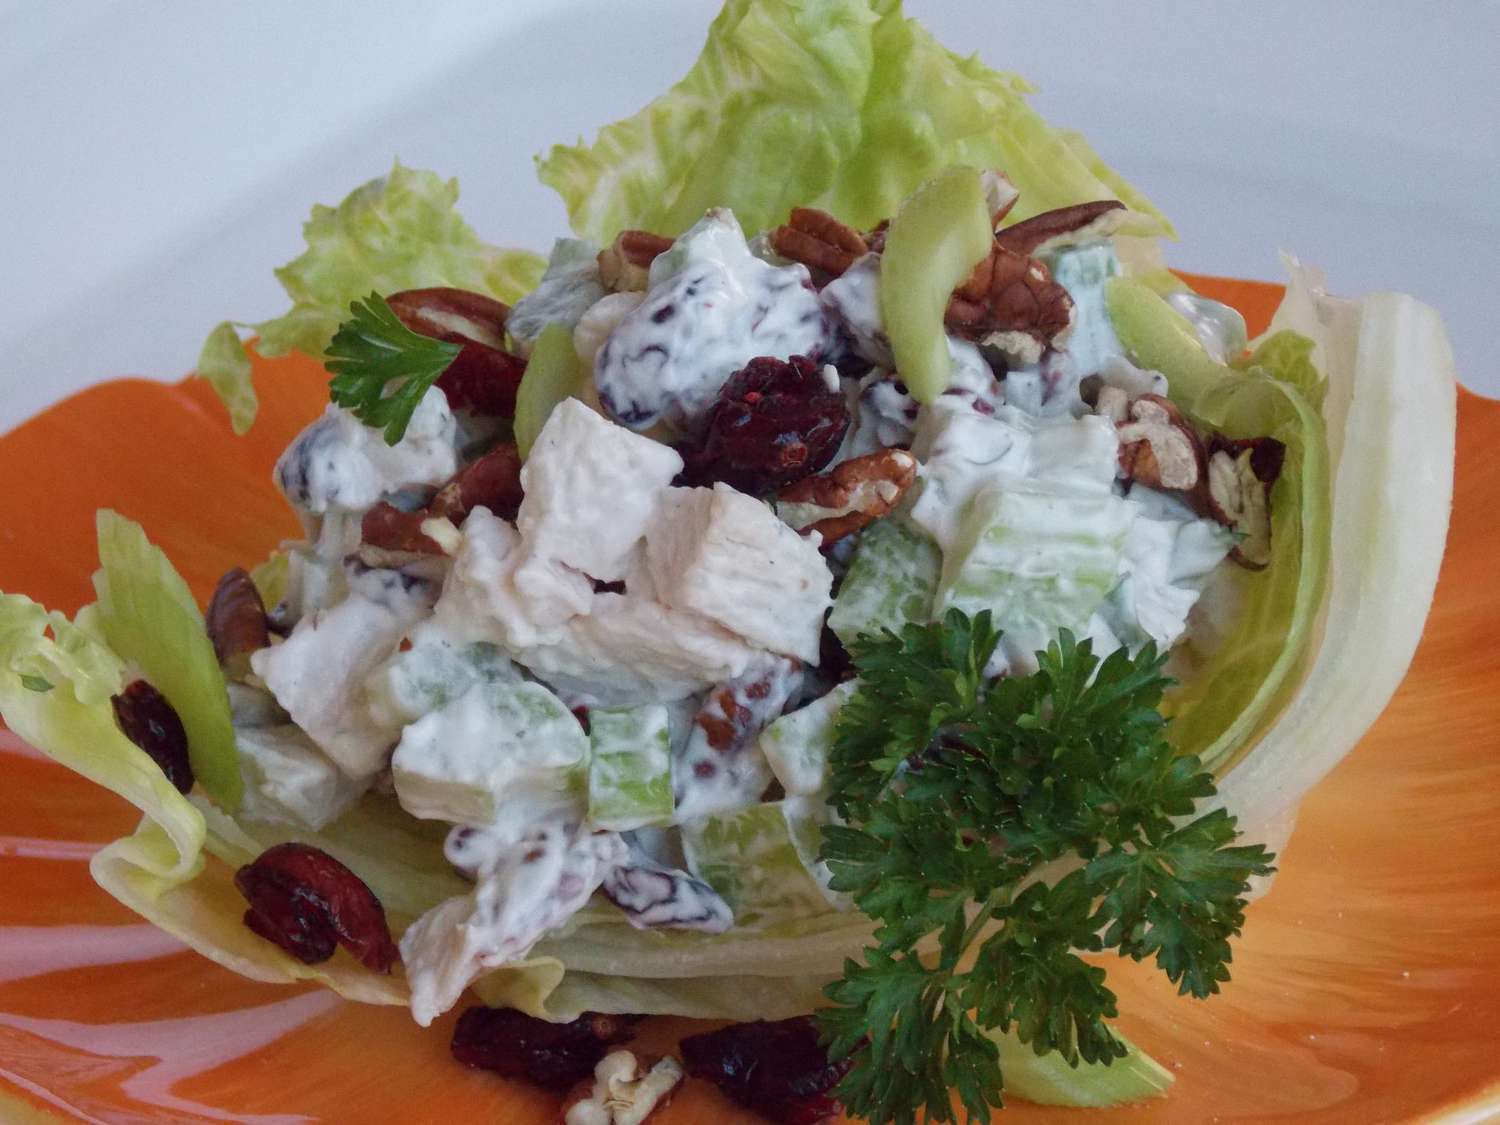 Turkey salad with walnuts and dried cranberries in a glass dish